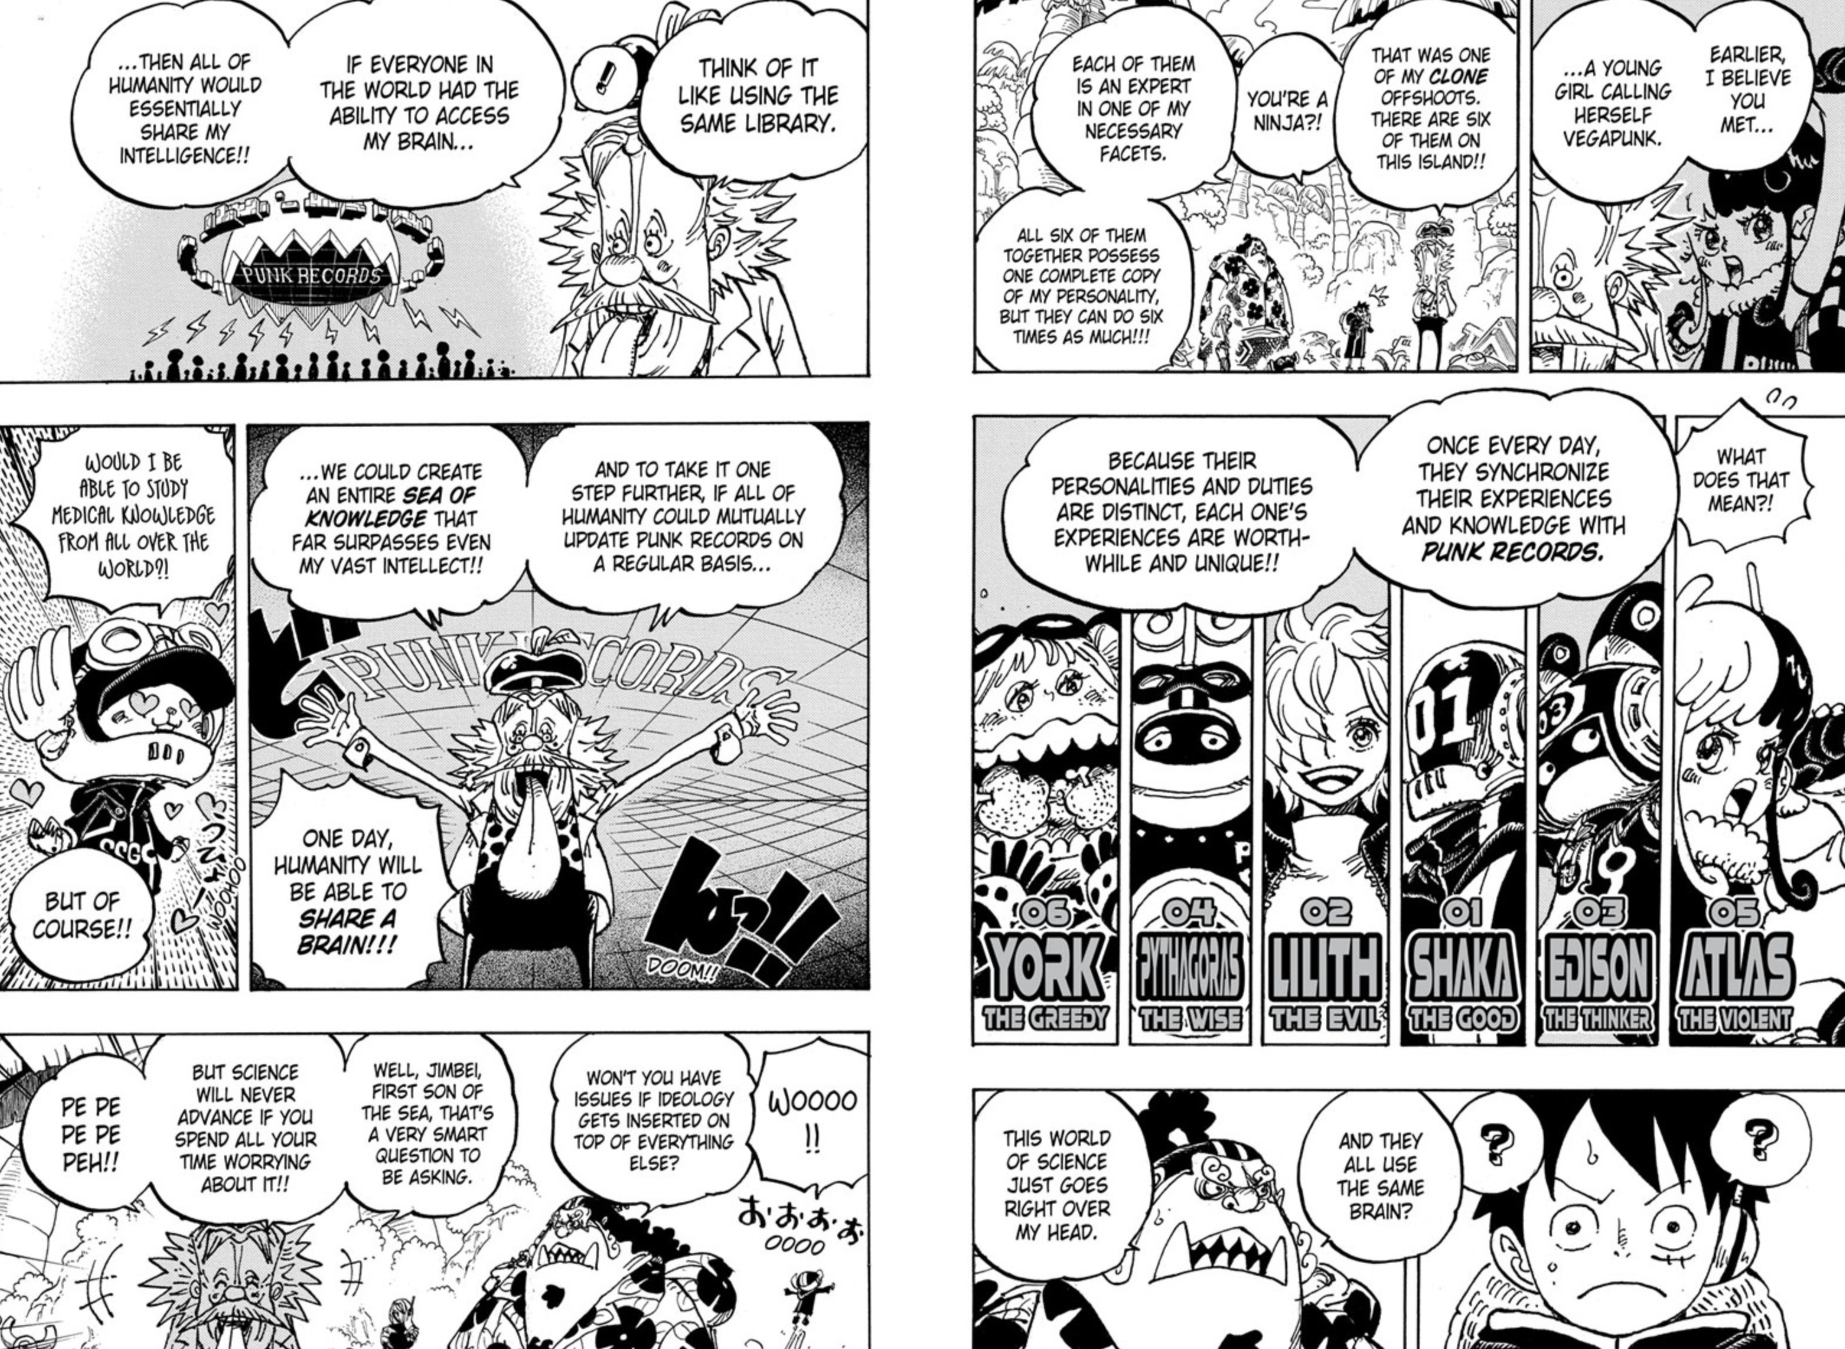 One Piece Chapter 1067 Pages 4-5